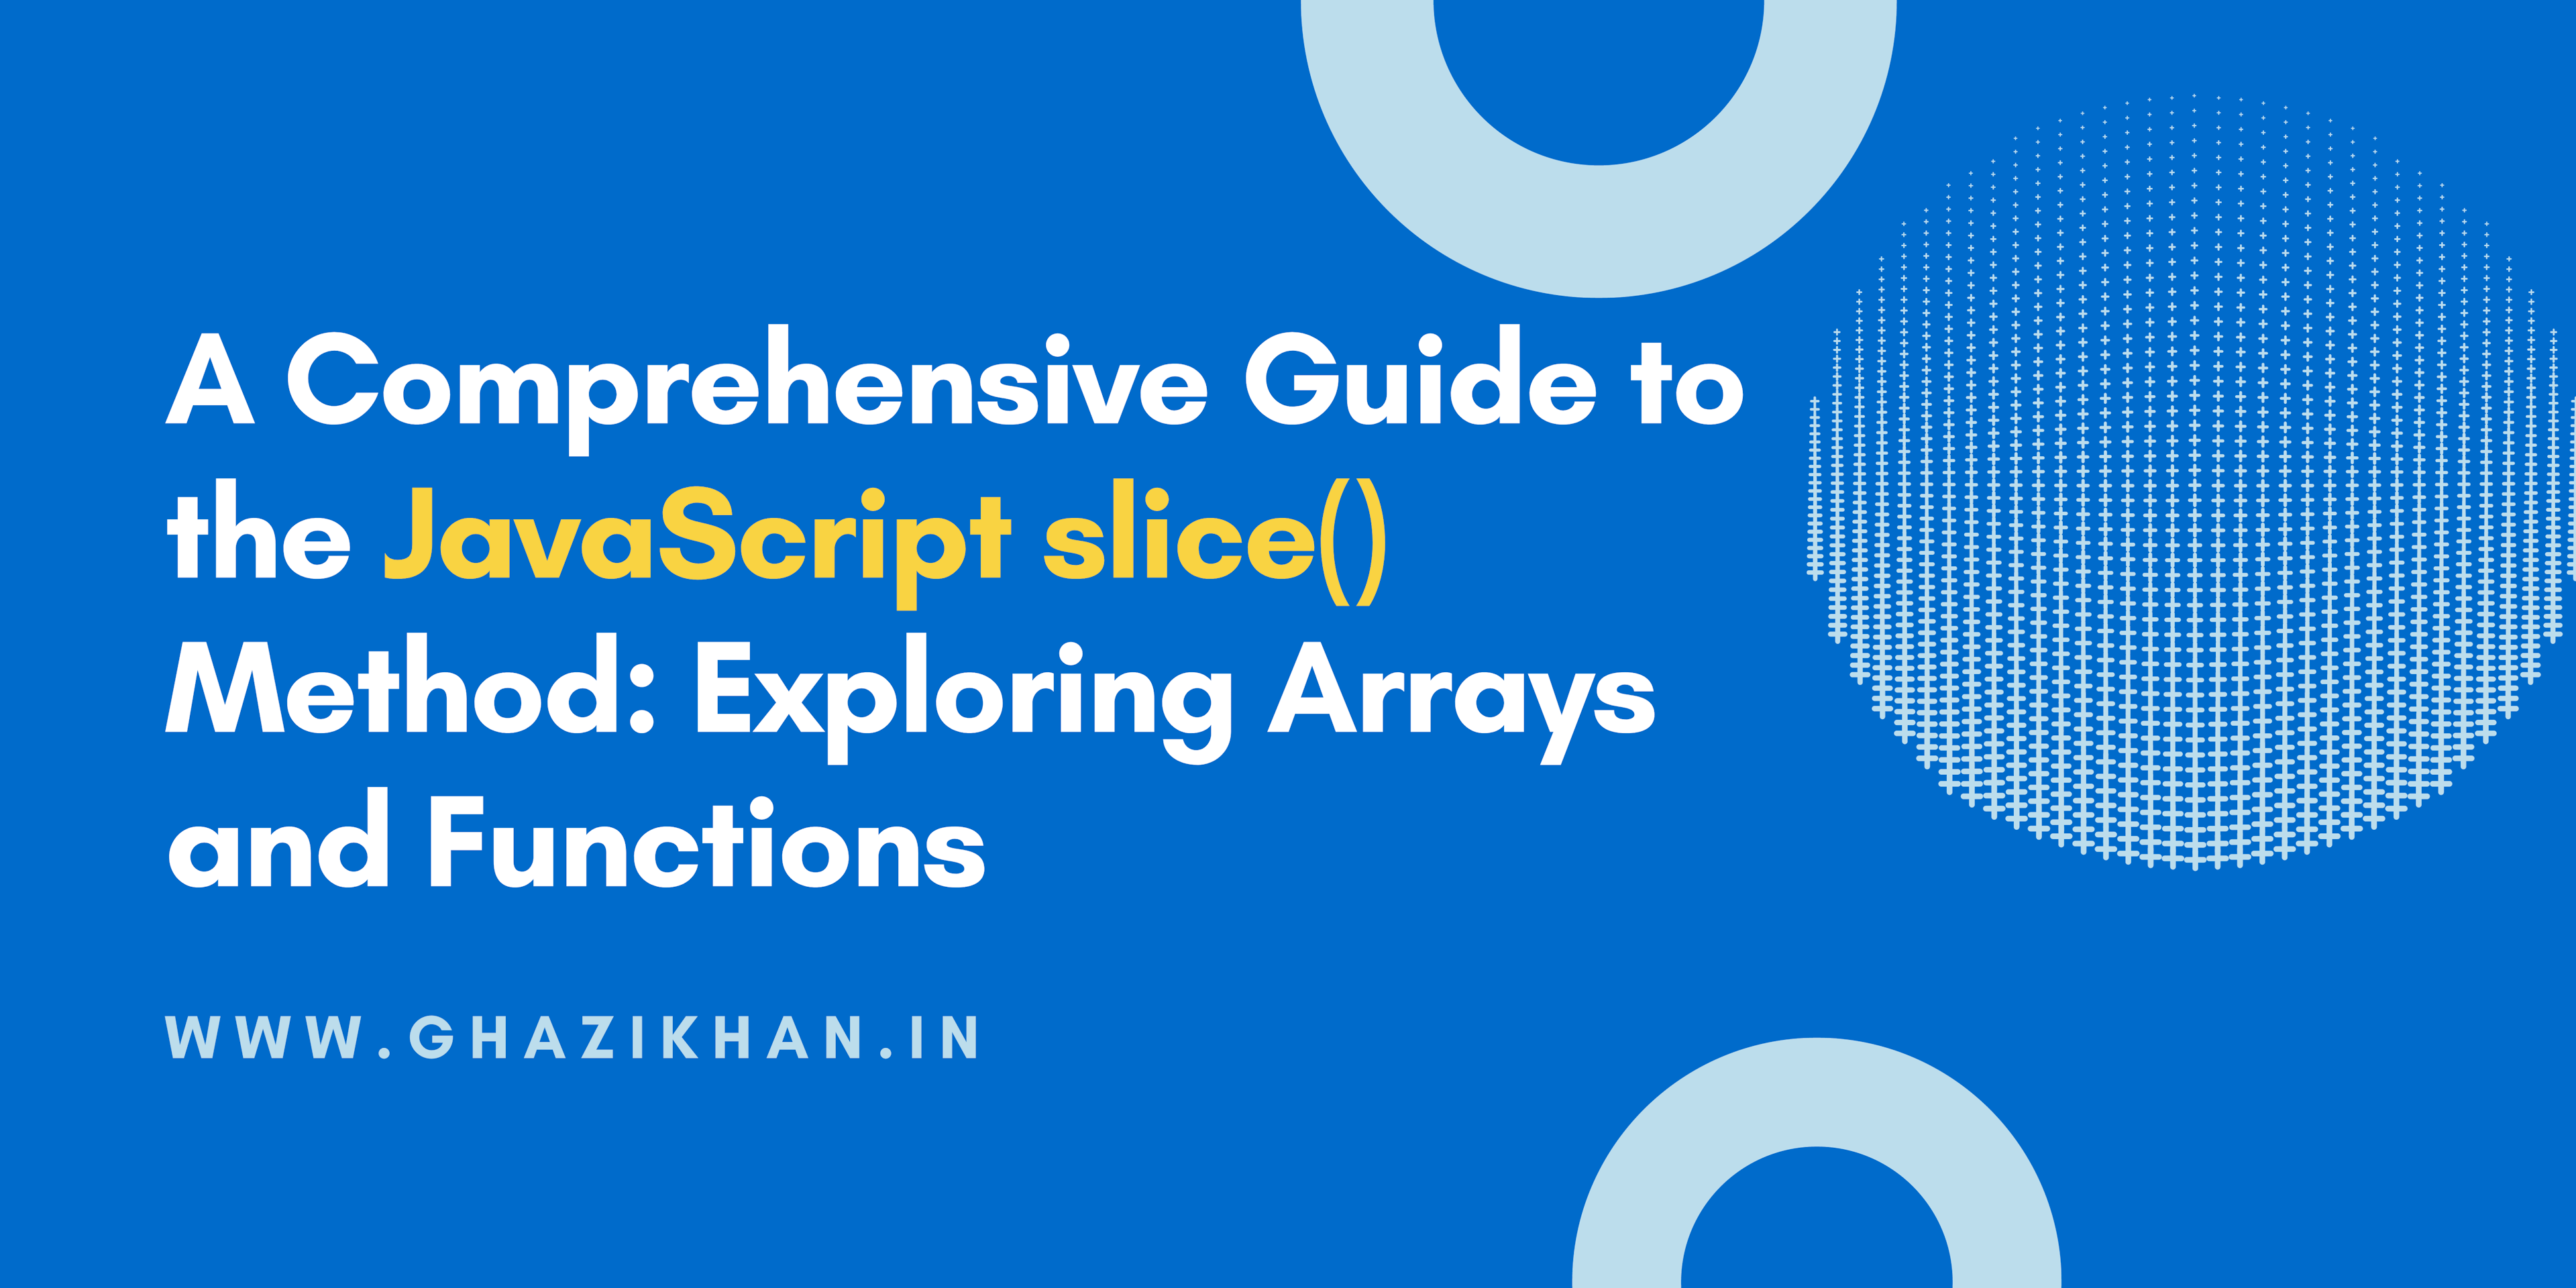 A Comprehensive Guide to the JavaScript slice() Method: Exploring Arrays and Functions